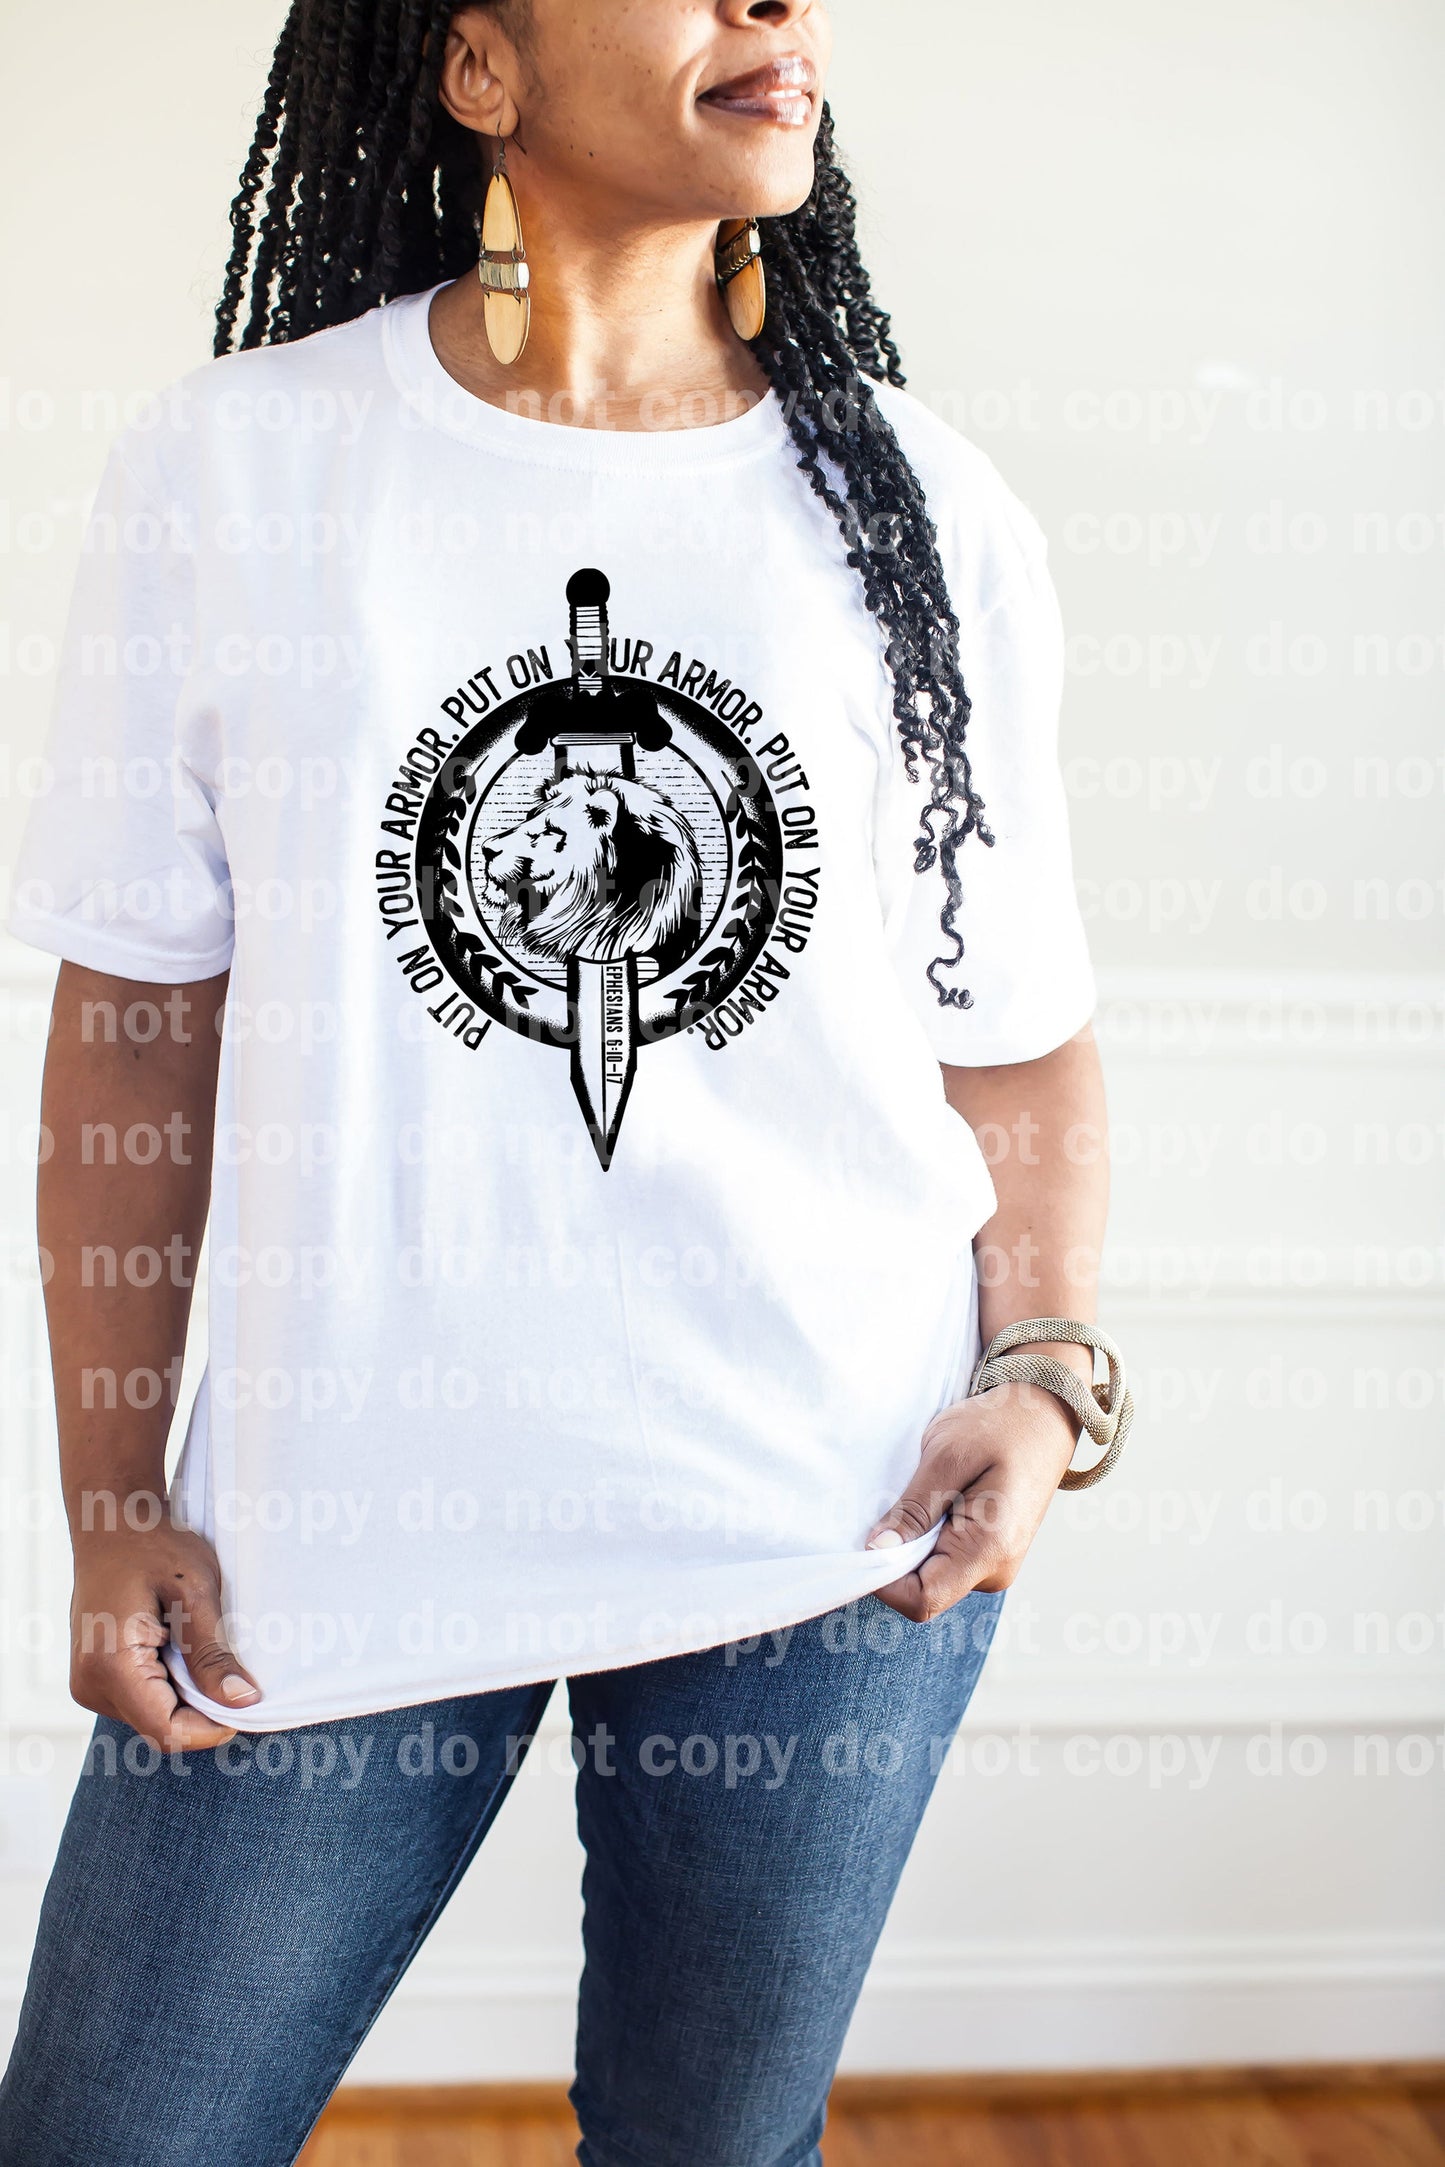 Put On Your Armor Dream Print or Sublimation Print